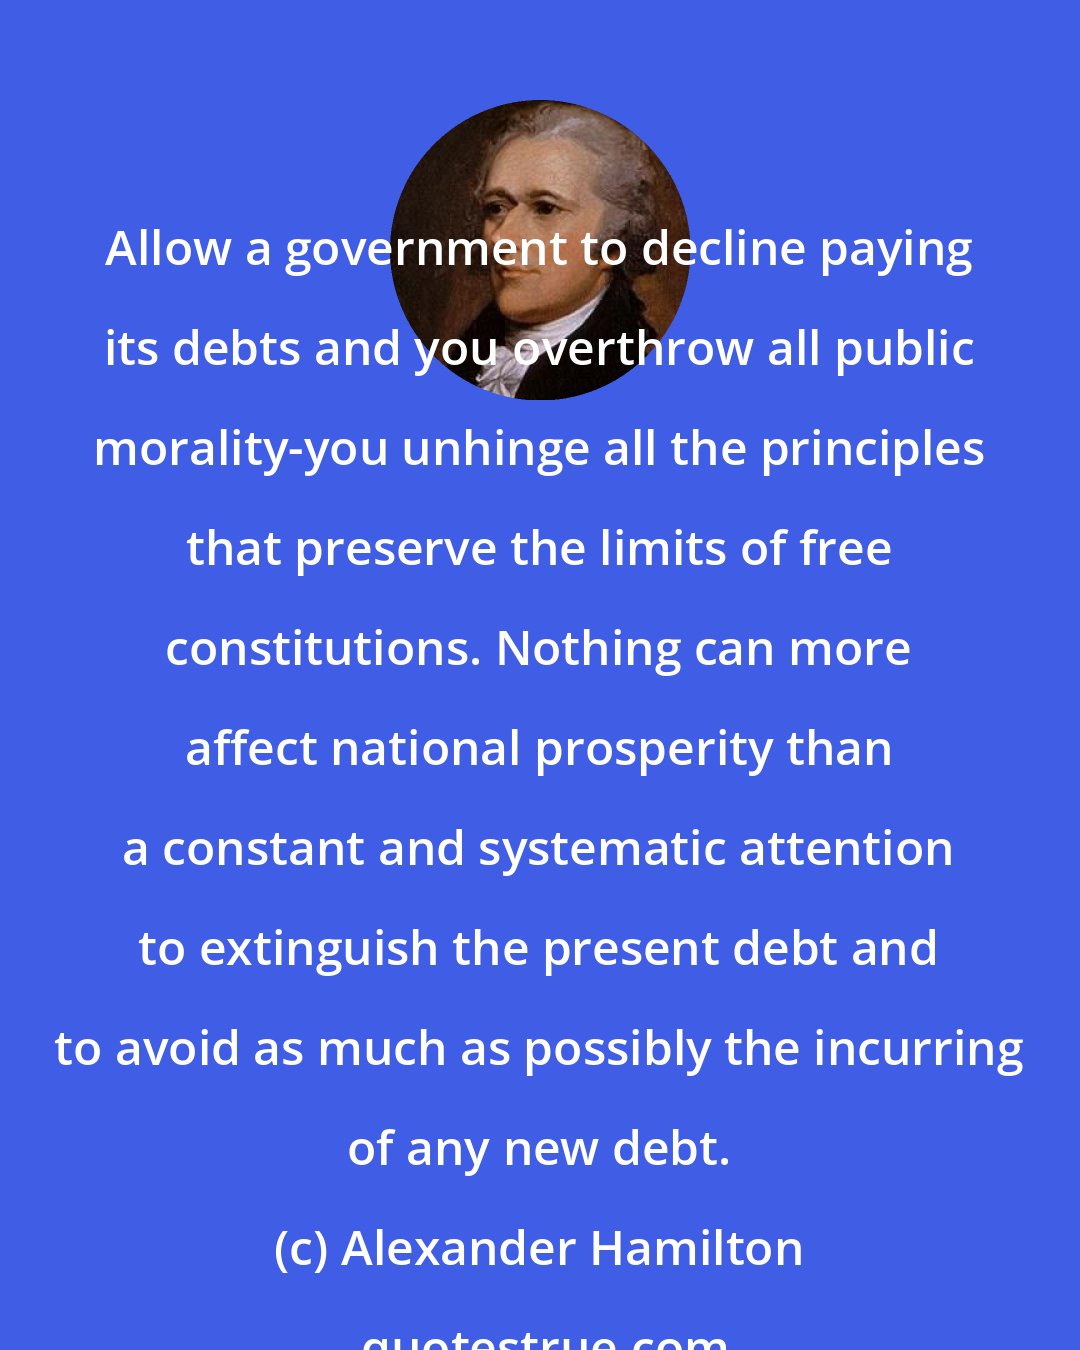 Alexander Hamilton: Allow a government to decline paying its debts and you overthrow all public morality-you unhinge all the principles that preserve the limits of free constitutions. Nothing can more affect national prosperity than a constant and systematic attention to extinguish the present debt and to avoid as much as possibly the incurring of any new debt.